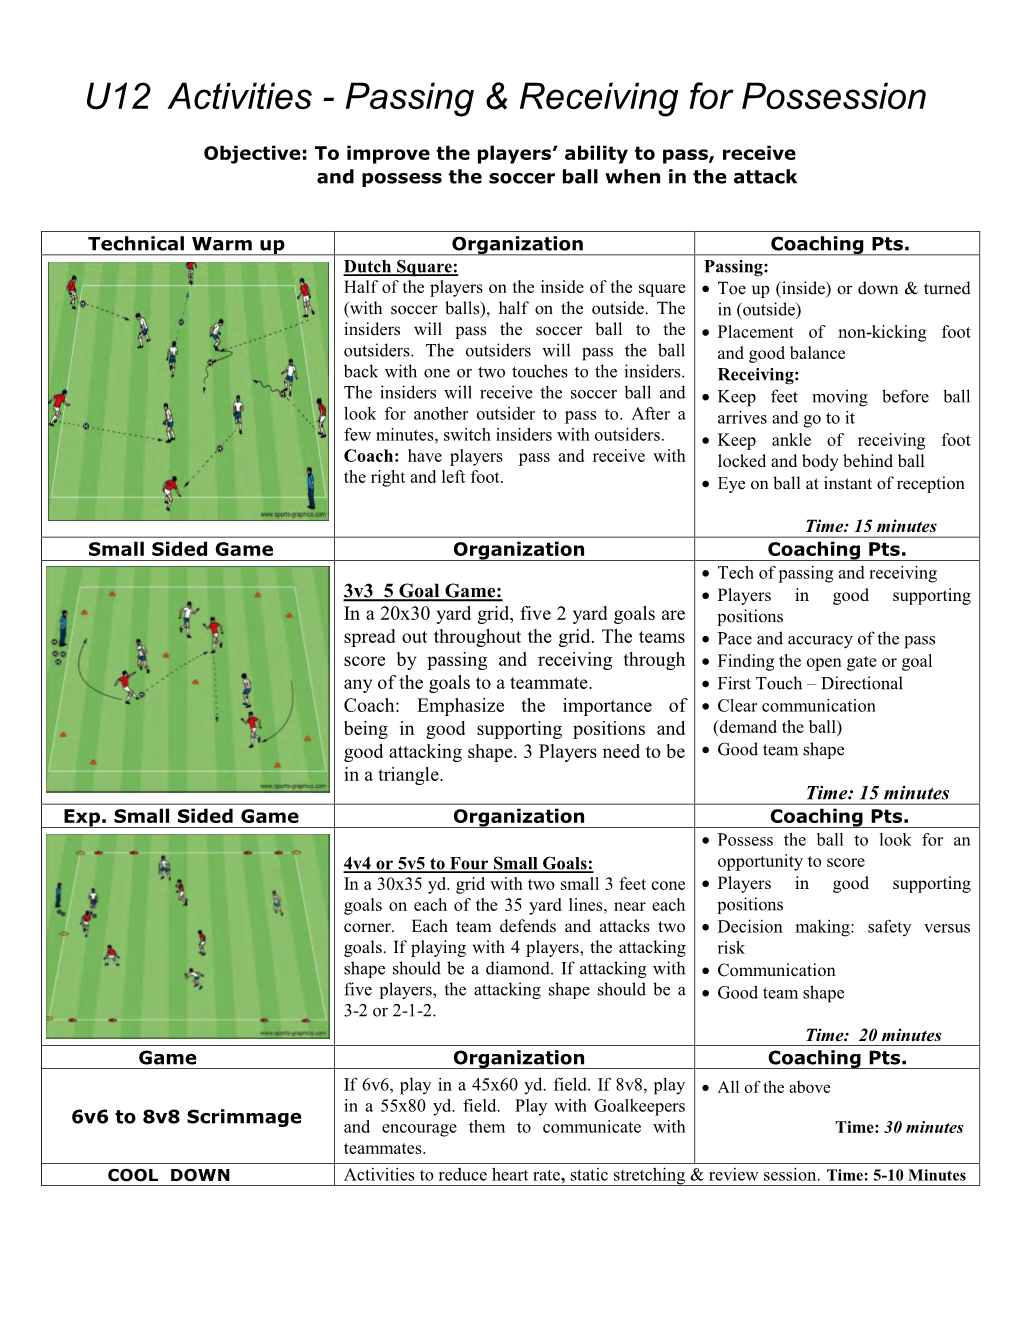 U12 Activities - Passing & Receiving for Possession